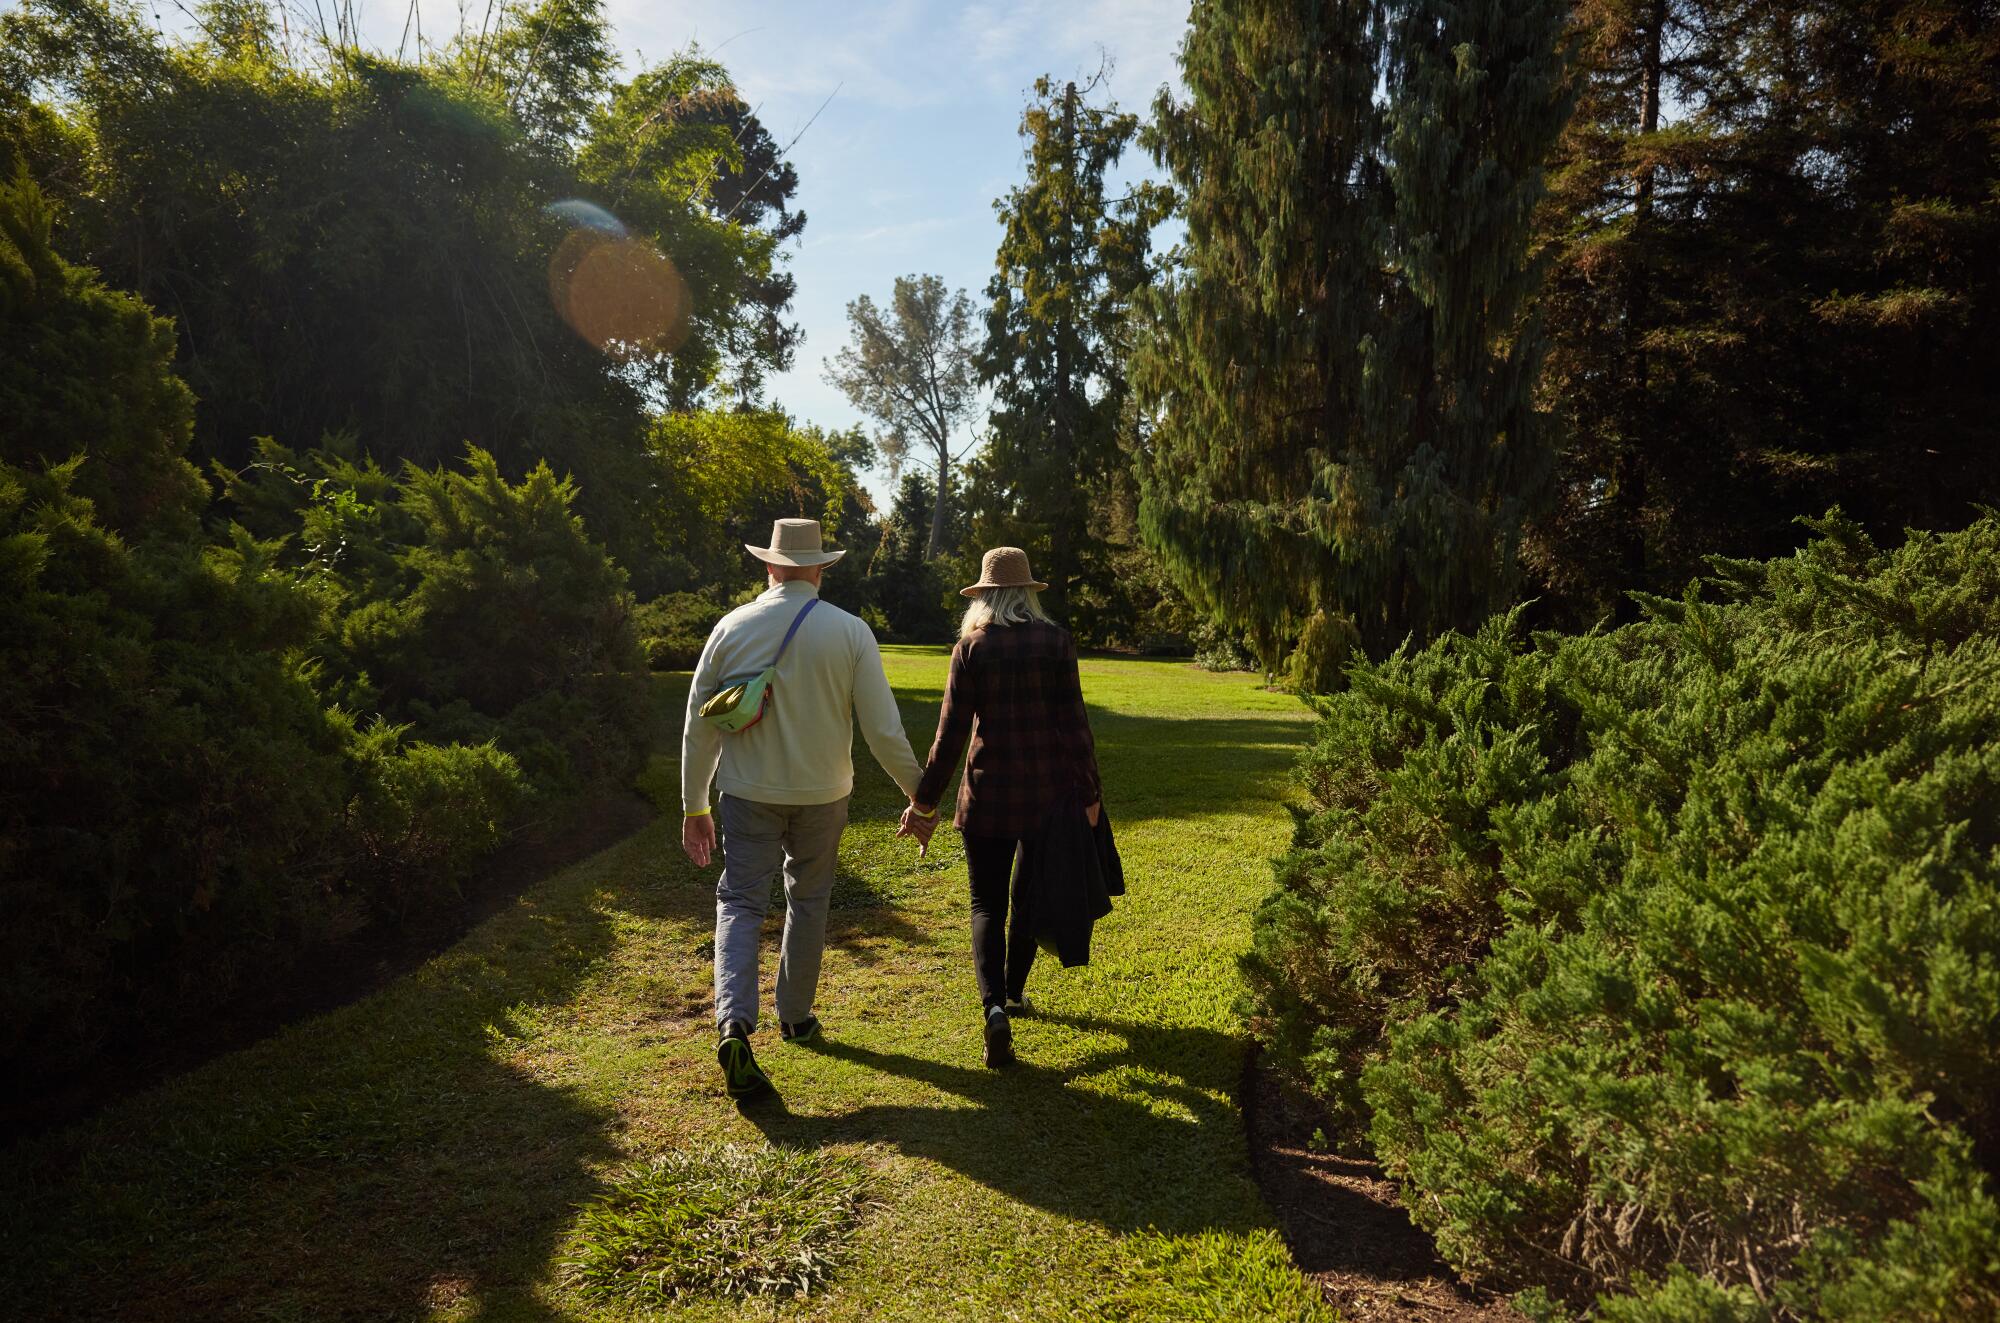 A couple, pictured from behind, walks hand in hand through a palm grove at the Huntington.